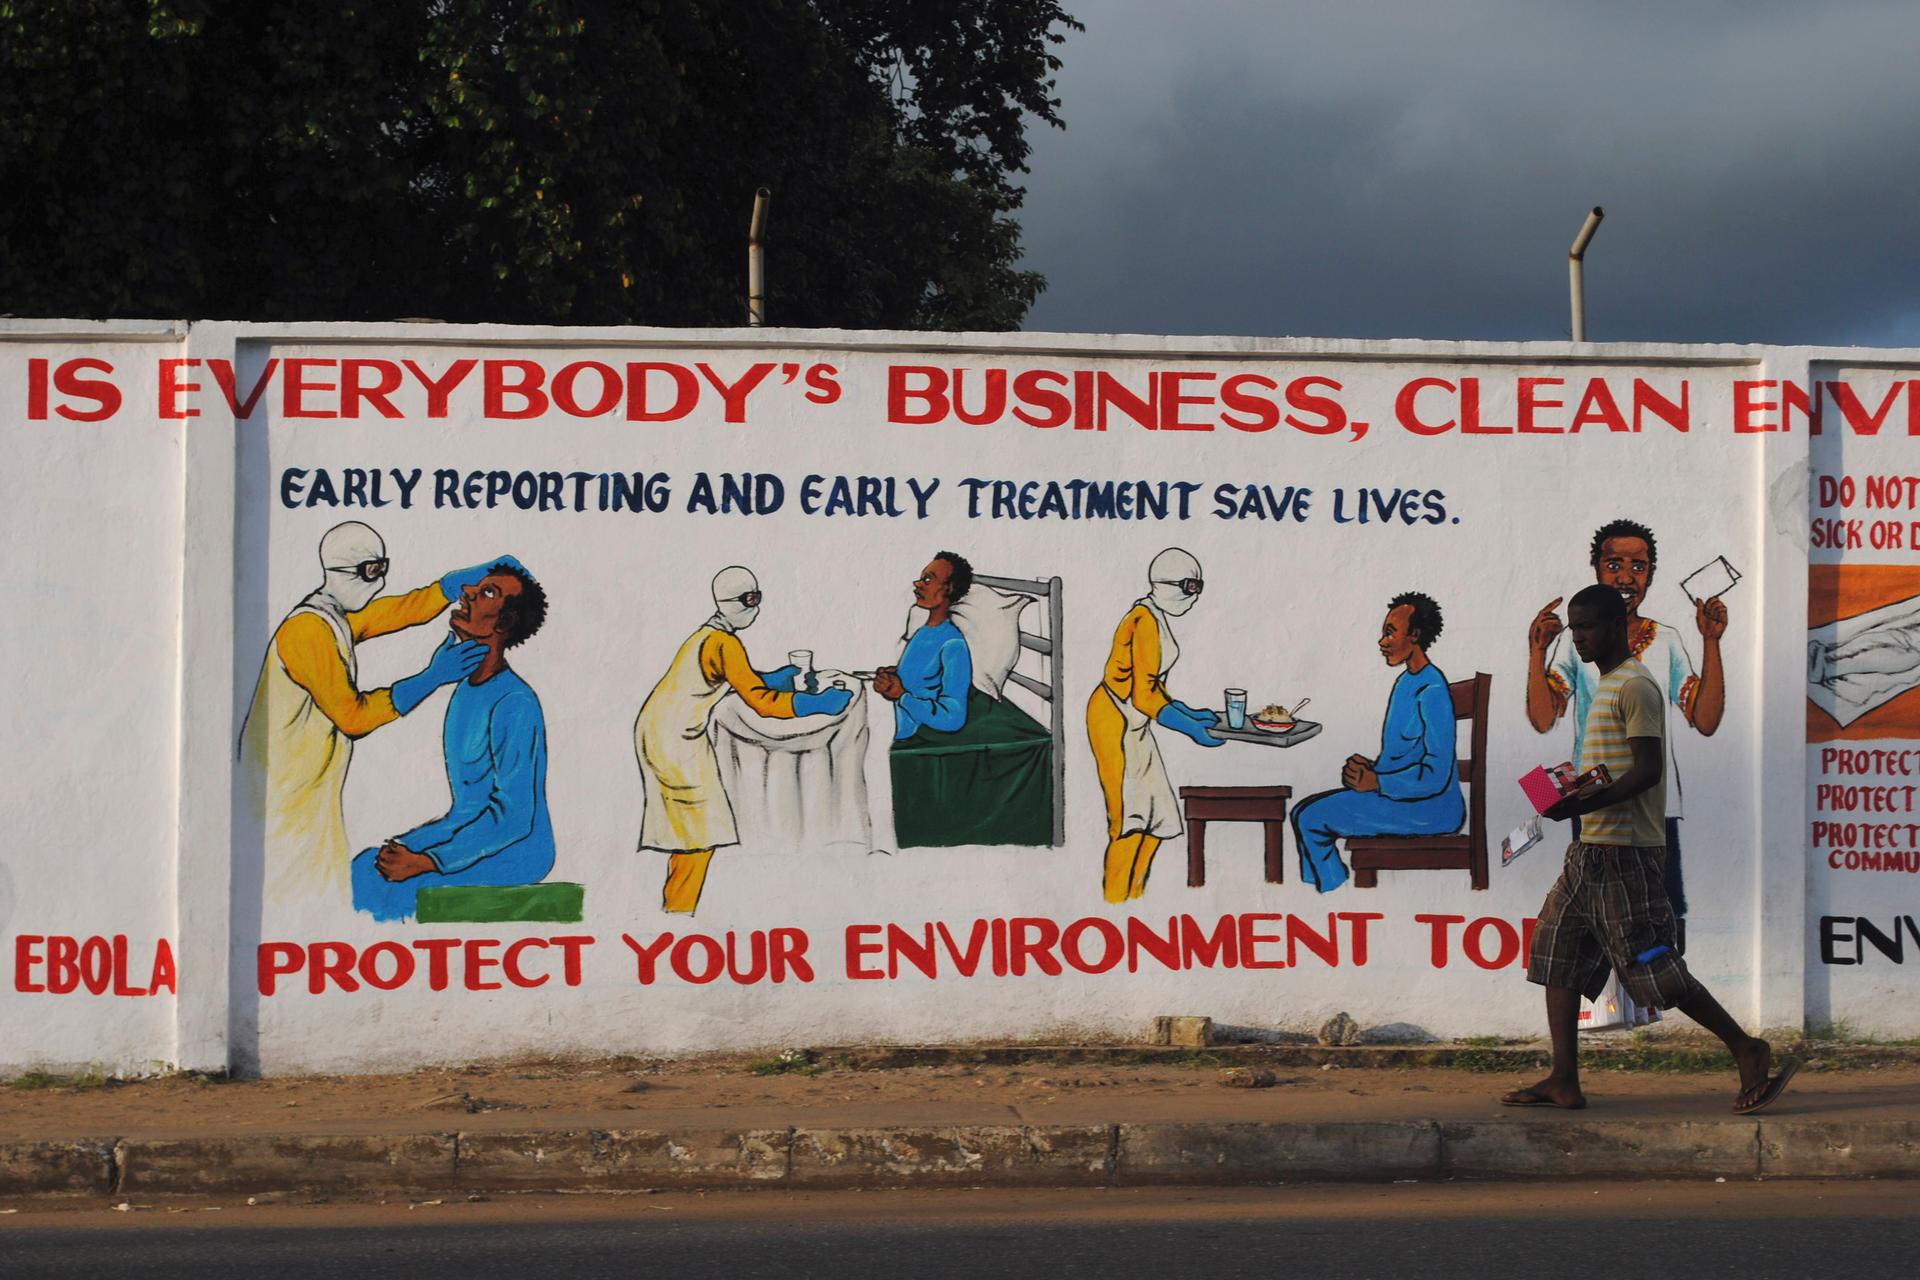 A mural in Monrovia illustrating health instructions for treating the Ebola virus.